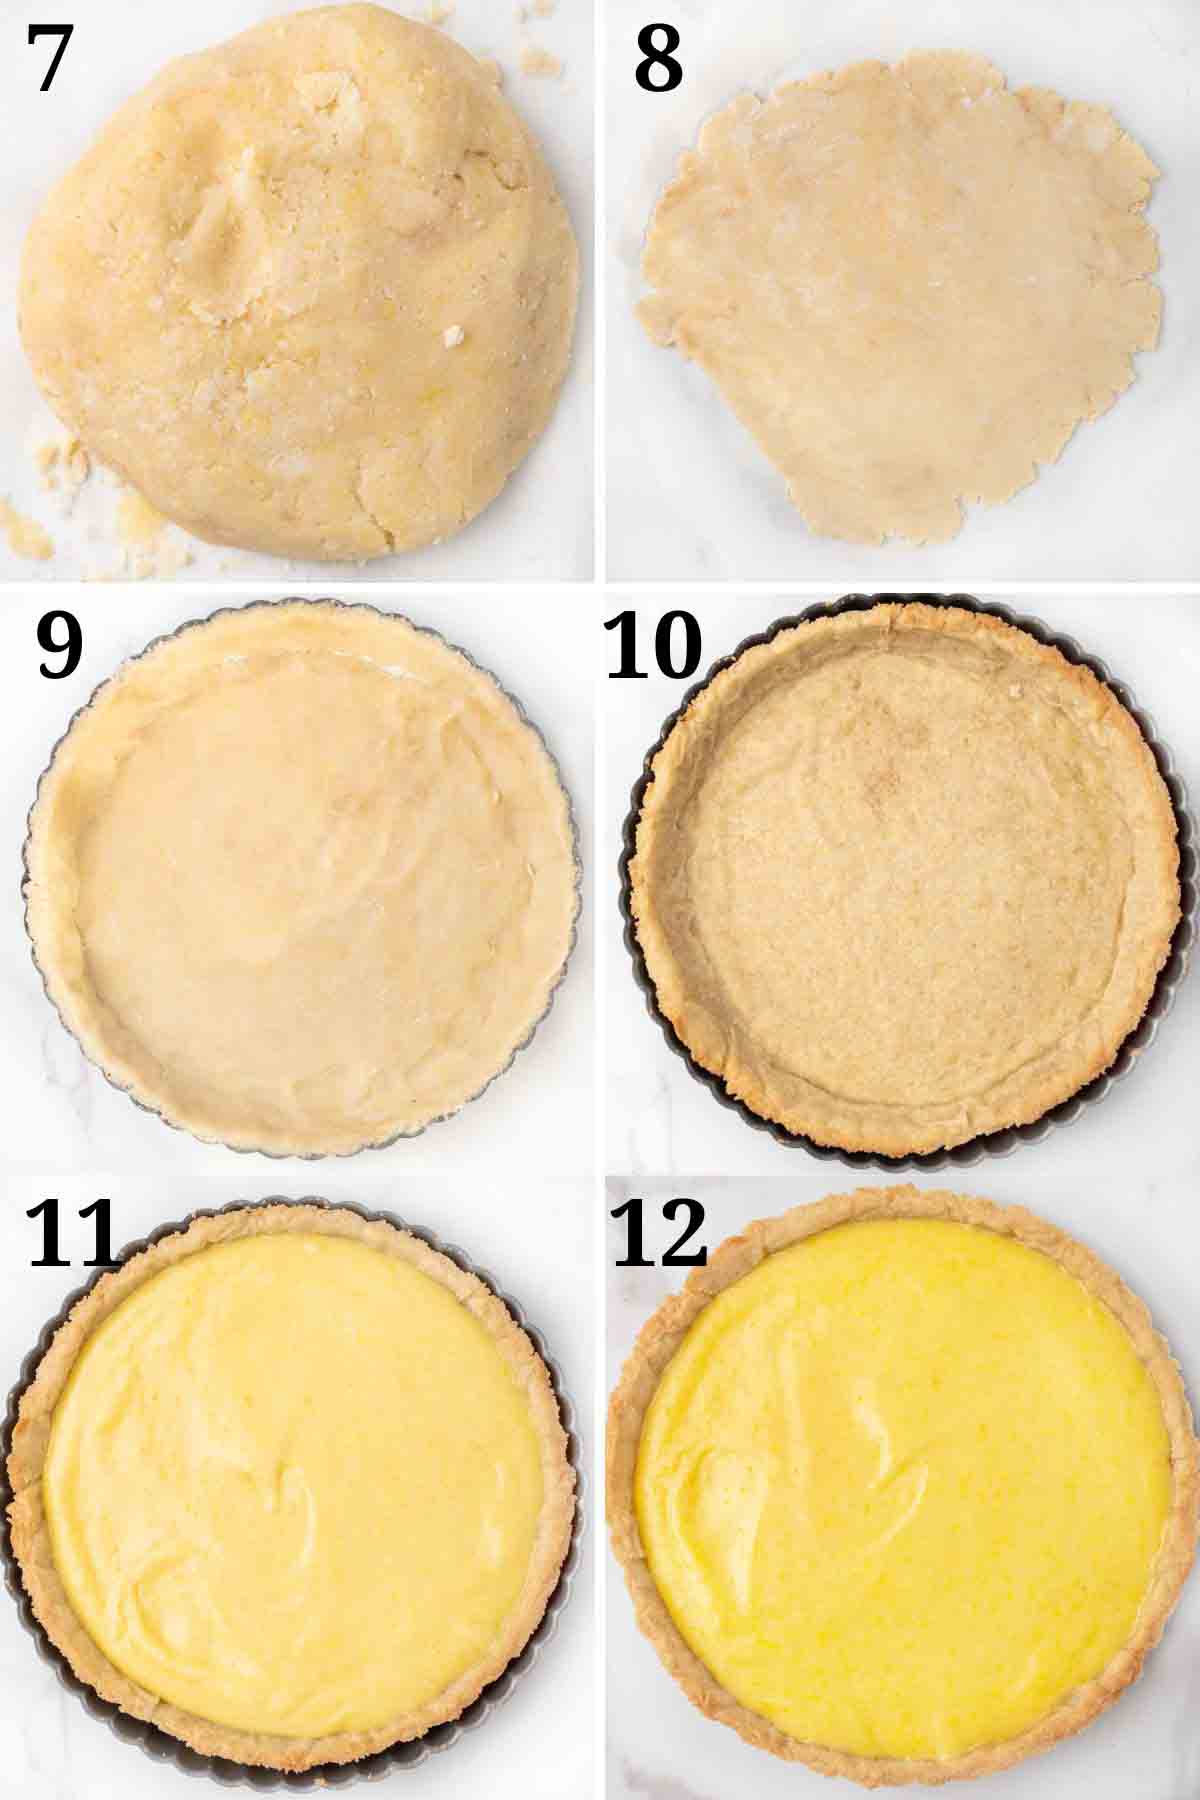 collage showing how to finish tart crust and bake filled tart.